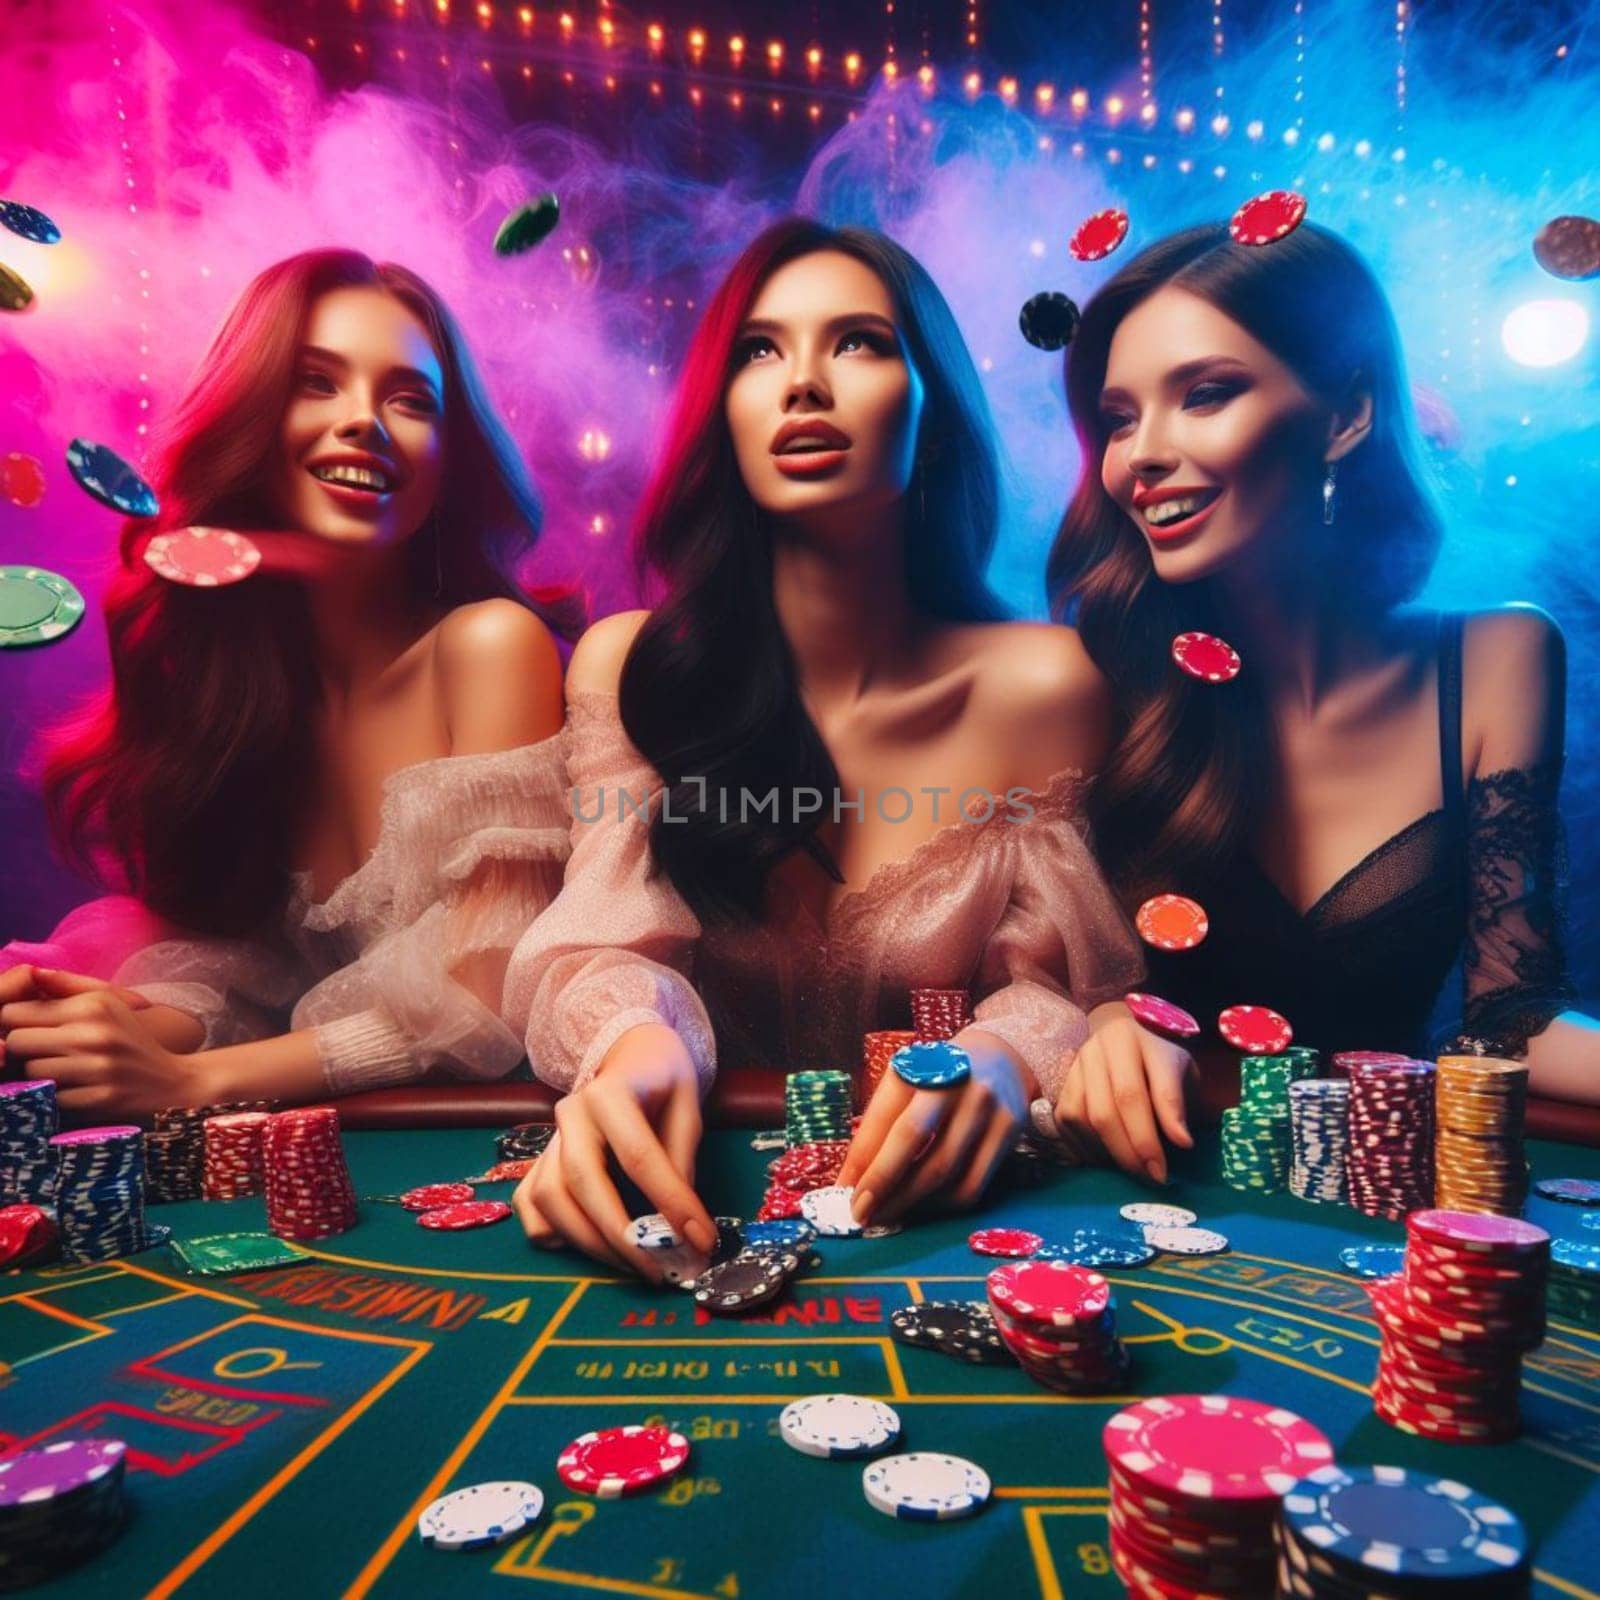 elegant women, dressed in stylish attire, are engaged in a game of craps at a bustling casino. by verbano